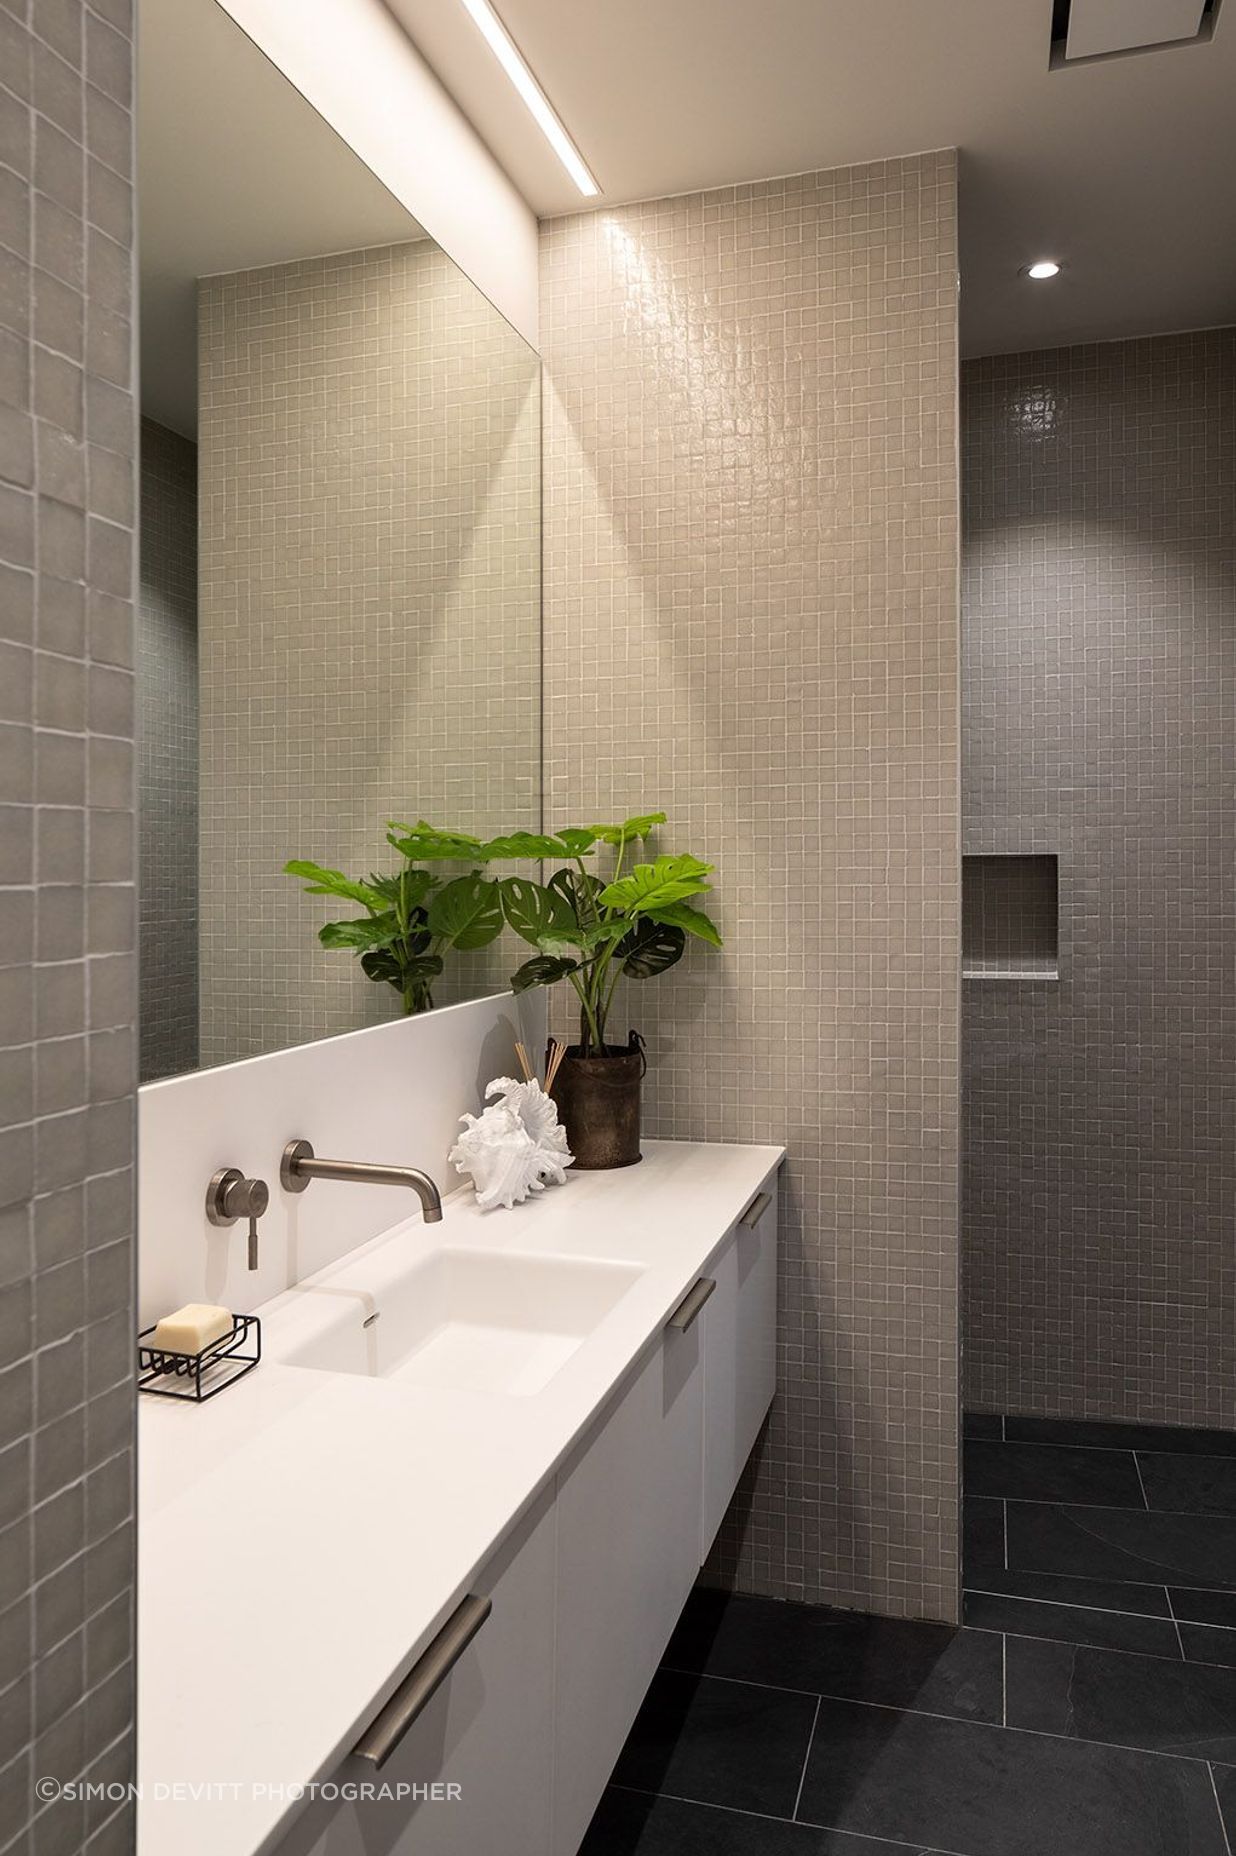 Uneven tiling adds a textural effect to the bathroom walls.